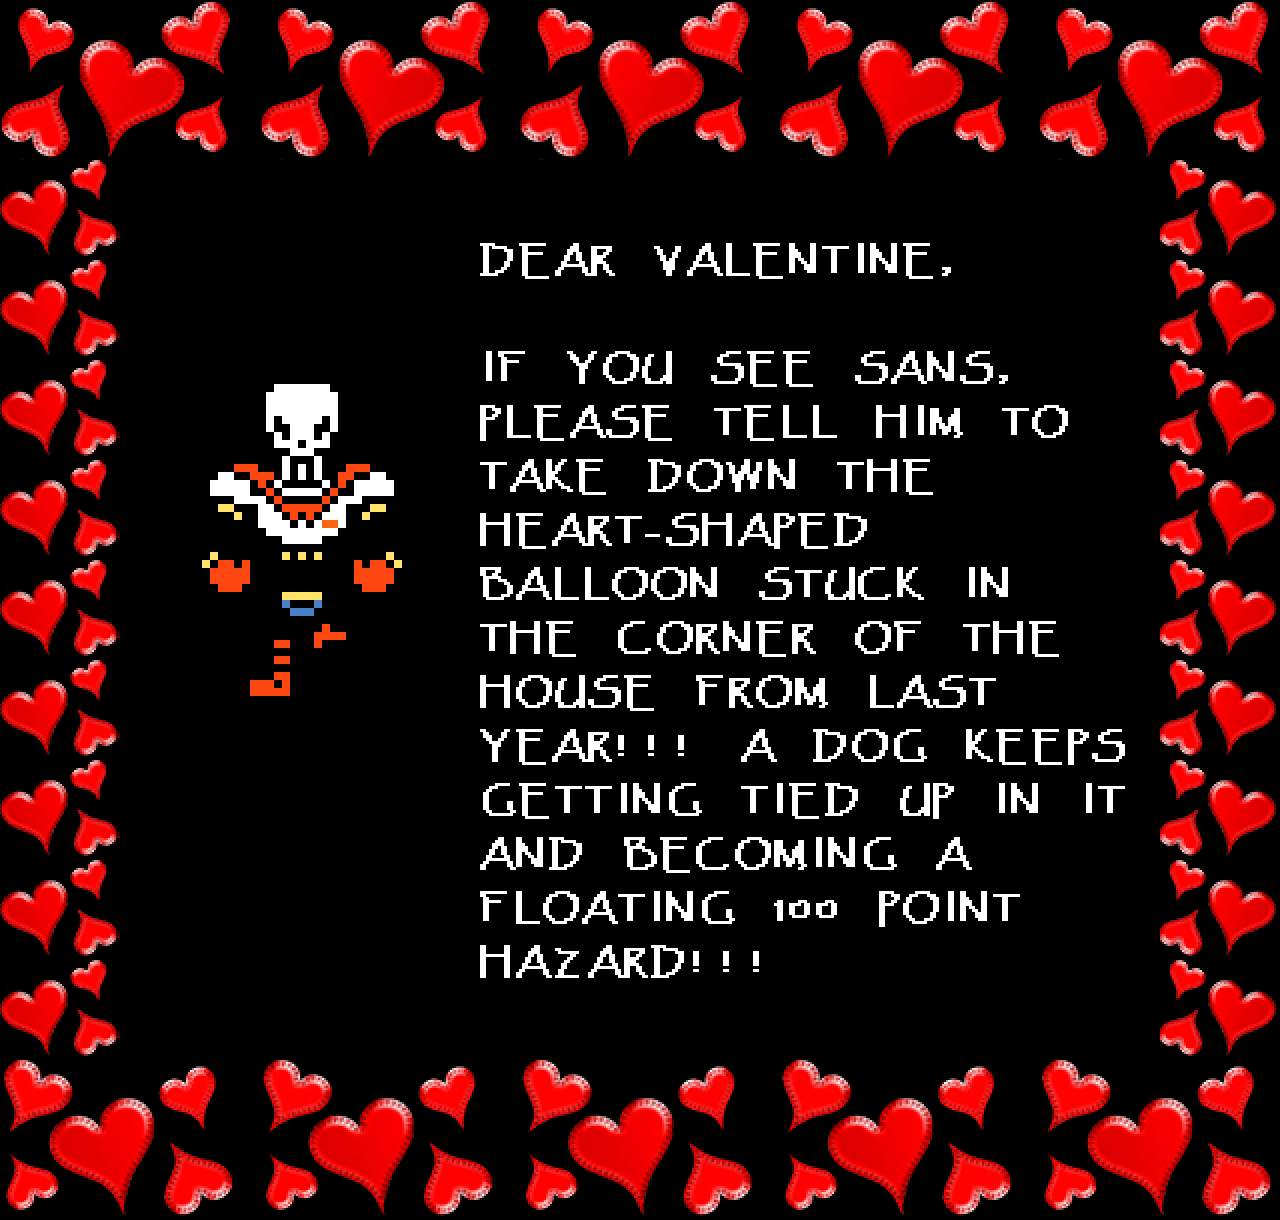 Papyrus: DEAR VALENTINE,

IF YOU SEE SANS, PLEASE TELL HIM TO TAKE DOWN THE HEART-SHAPED BALLOON STUCK IN THE CORNER OF THE HOUSE FROM LAST YEAR!!! A DOG KEEPS GETTING TIED UP IN IT AND BECOMING A FLOATING 100 POINT HAZARD!!!